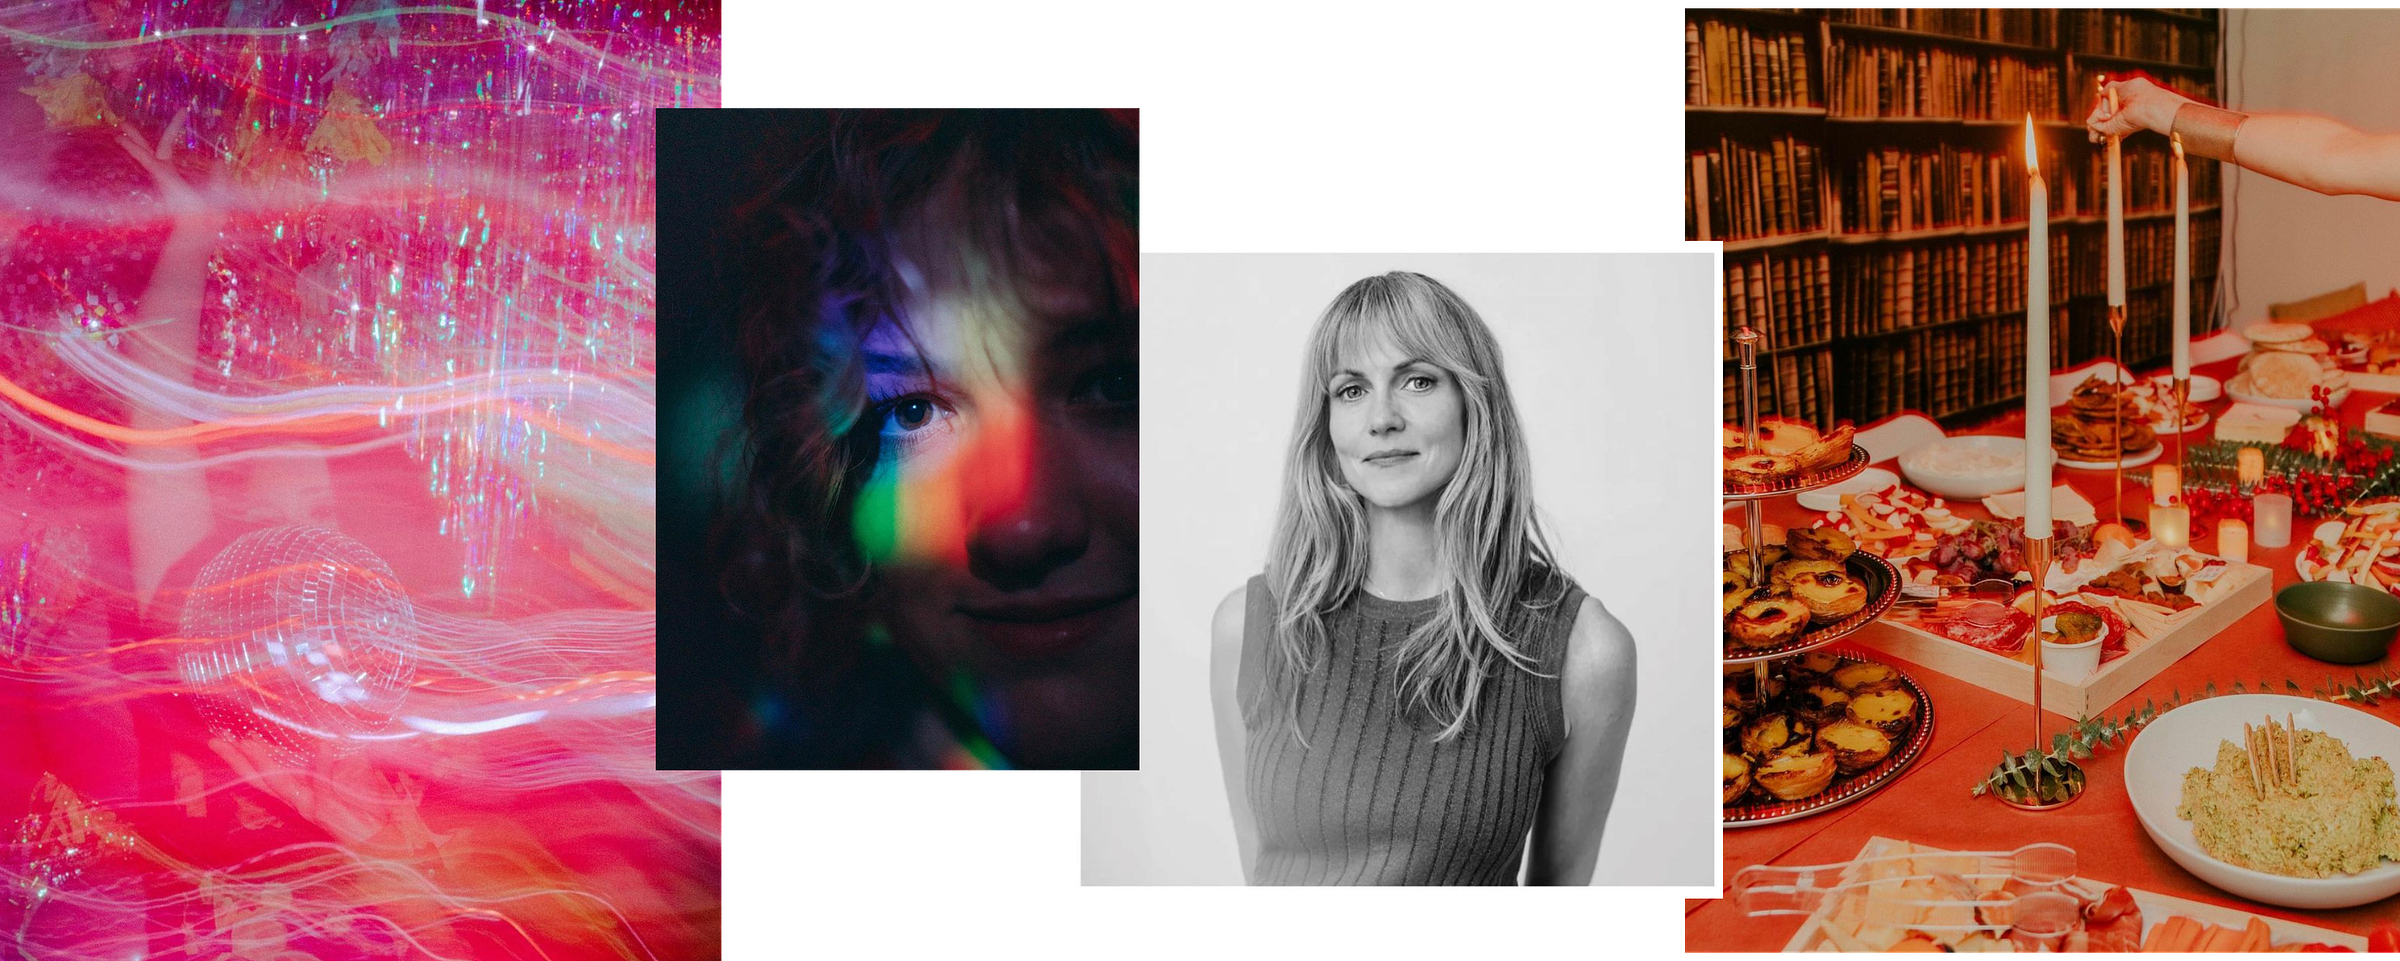 4 images, from left to right: 1) a bright pink photograph of someone dancing with a disco ball. The slow shutter speed leads trails of neon light making waves across the frame. 2) a portrait of Caroline, up close so you mostly see just her eye illuminated by a rainbow light, touching the edges of her nose on one side and soft curls on the other. 3) a black and white portrait of becca parrish of Becca PR. 4) a photograph of a table scape with bright red and yellow hues